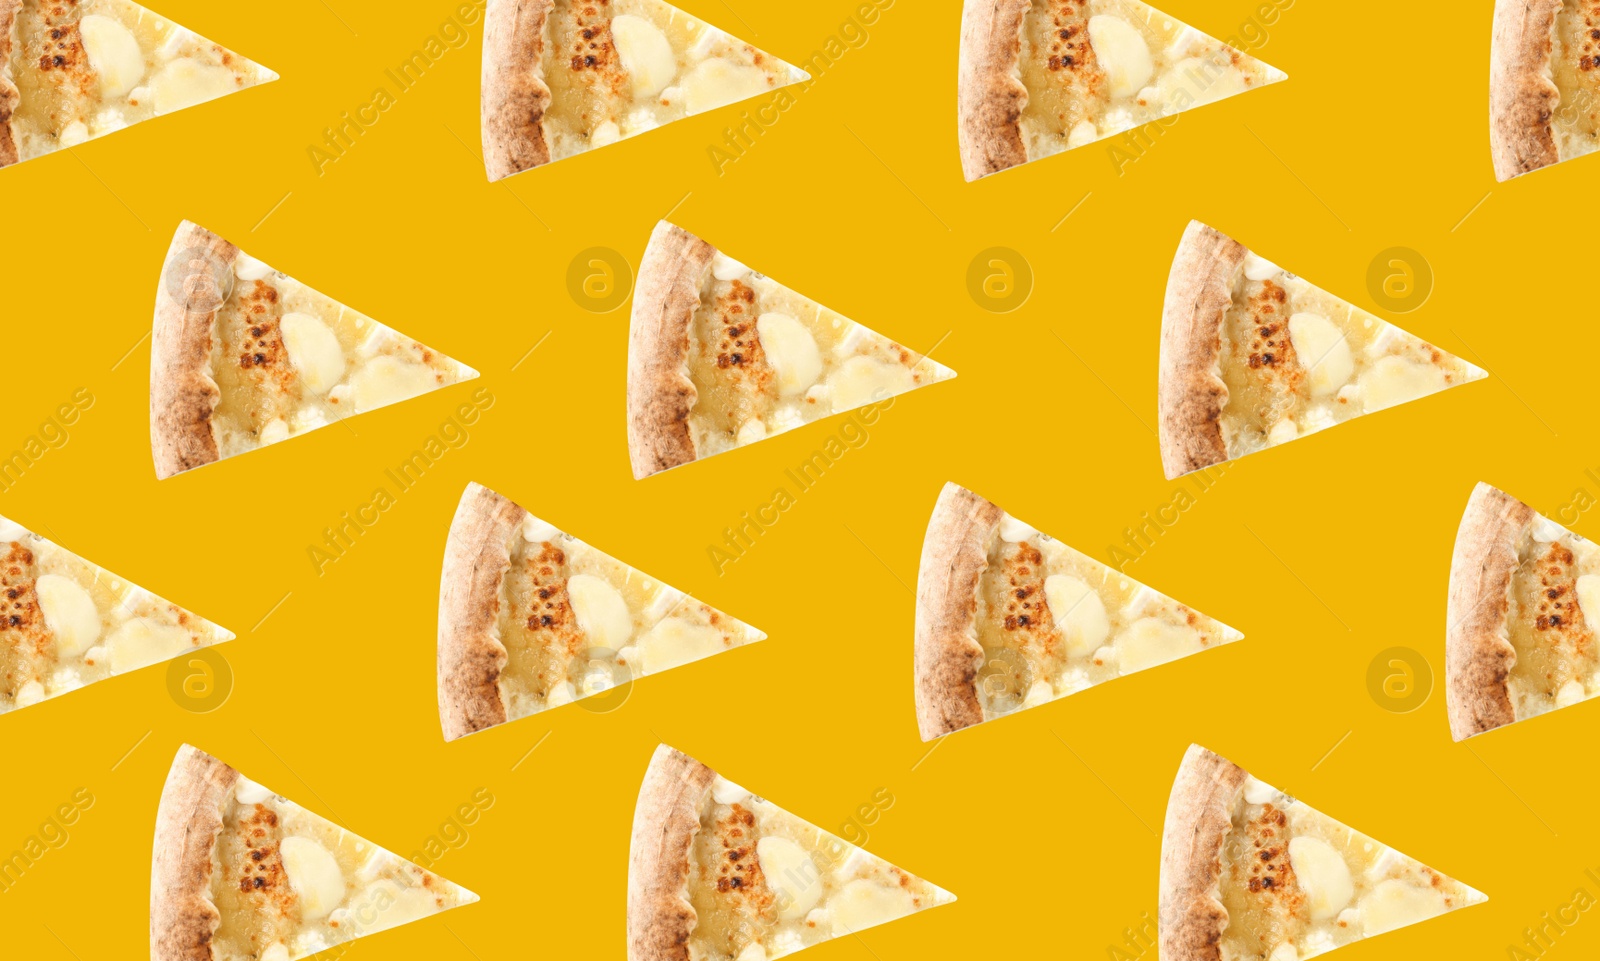 Image of Cheese pizza slices on yellow background. Pattern design